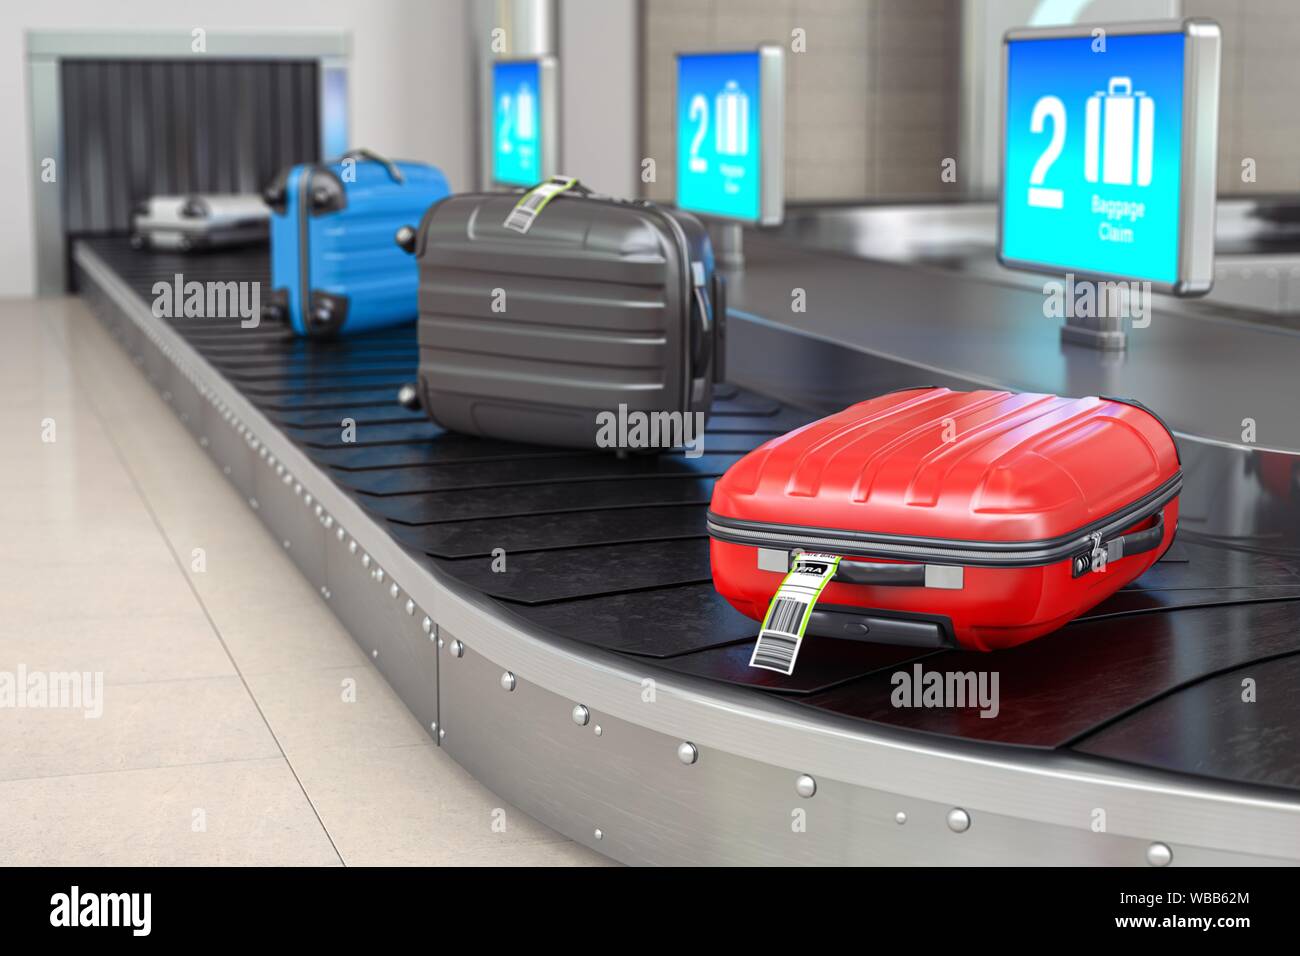 266,140 Luggage Airport Images, Stock Photos, 3D objects